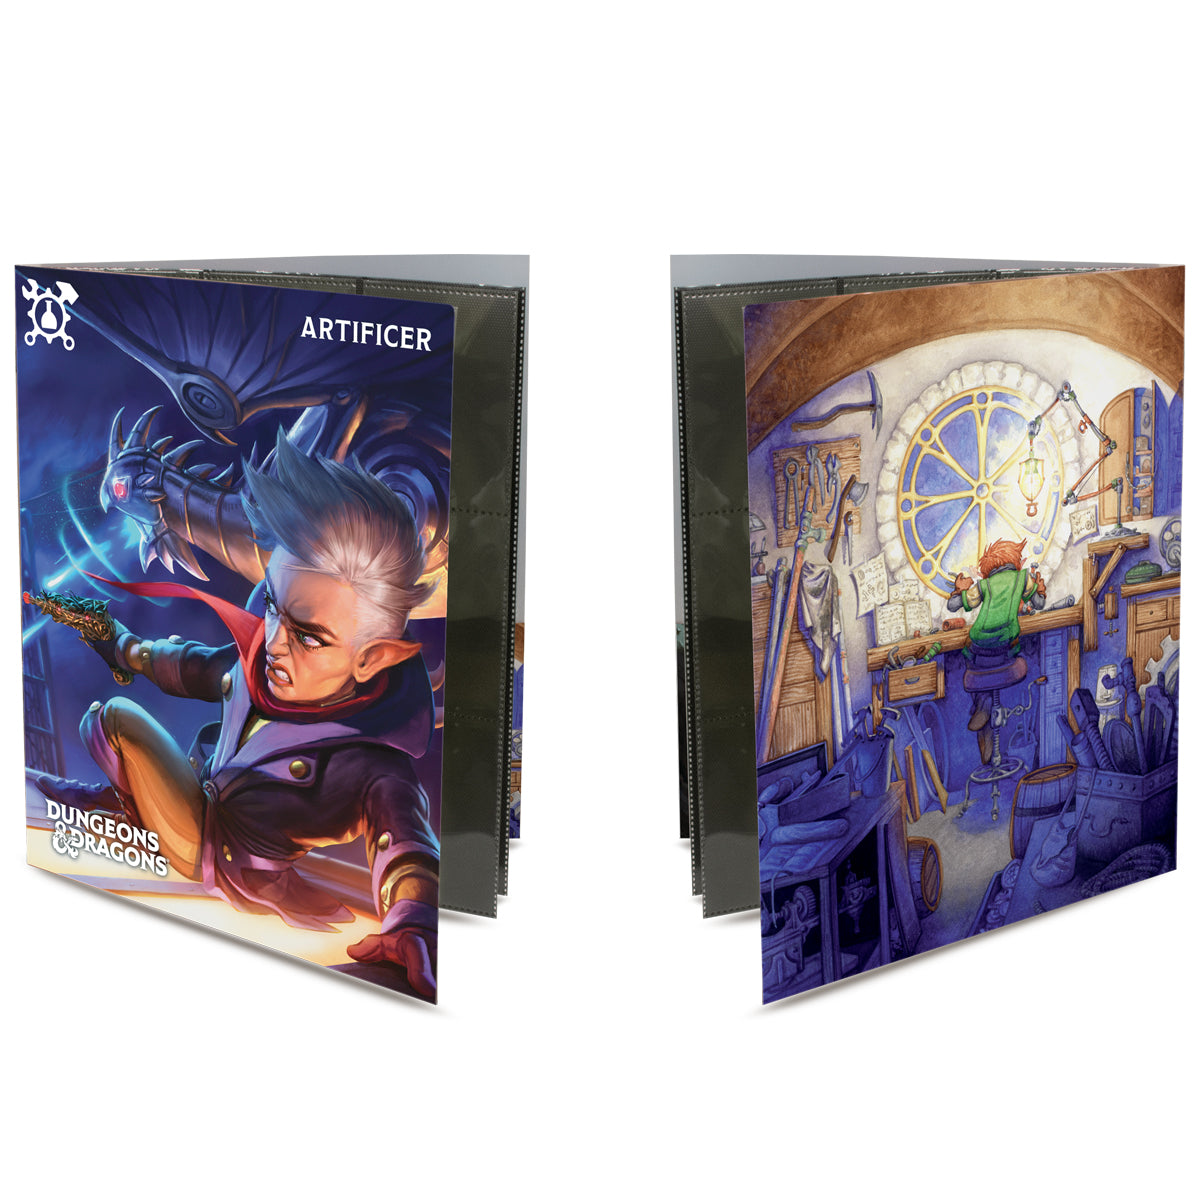 Board game Pathfinder Adventure Card Game Fighter Class Deck (Pathfinder  Adventure Card Game : Fighter Class Deck), Toy Hobby